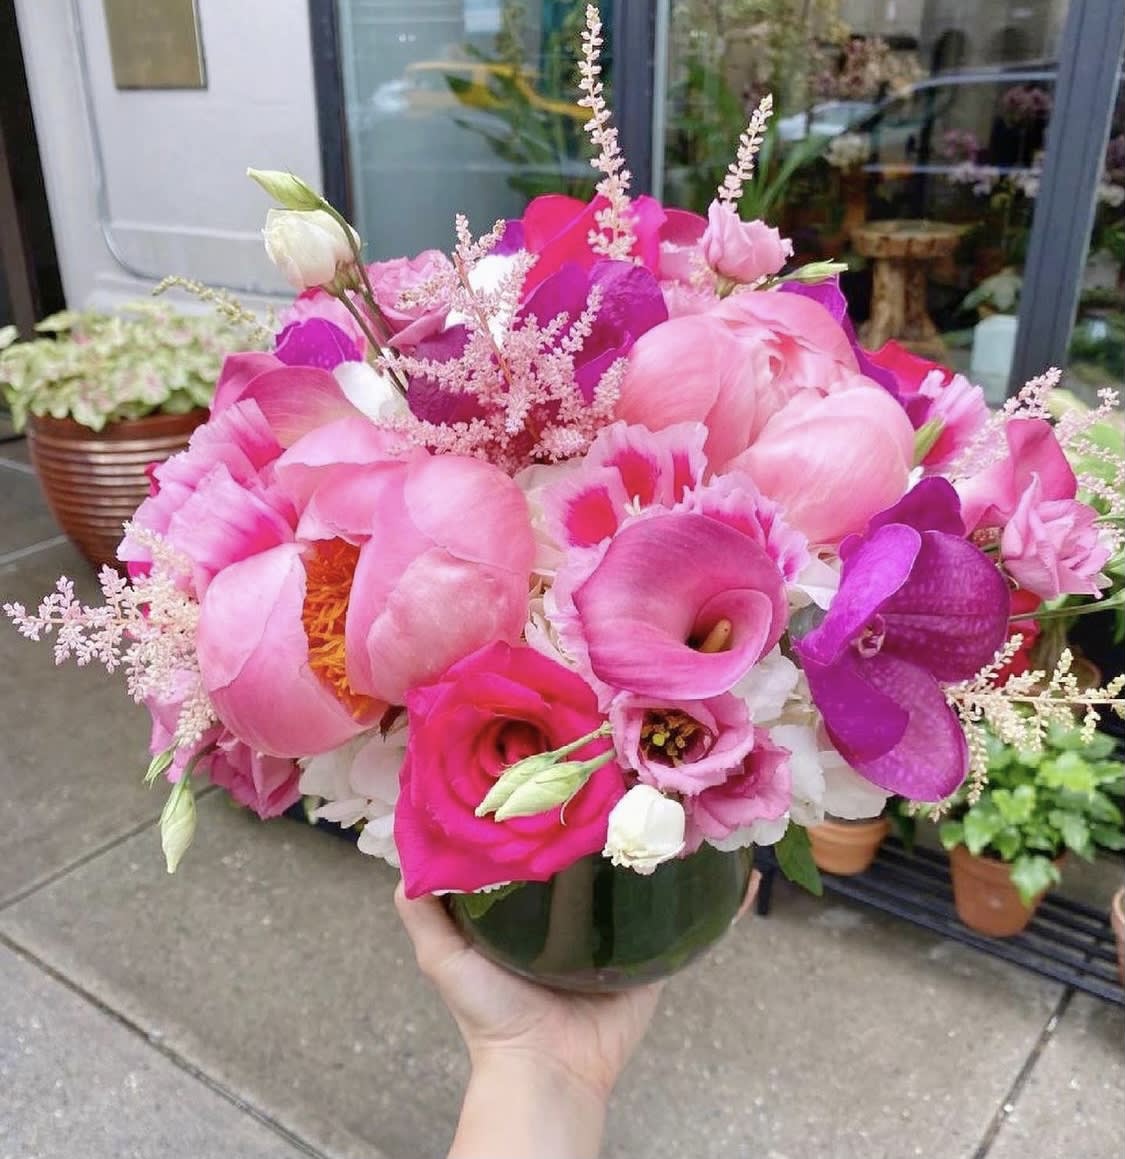 Pretty in Pink - An all pink arrangement in a glass vase. Flowers subject to availability.